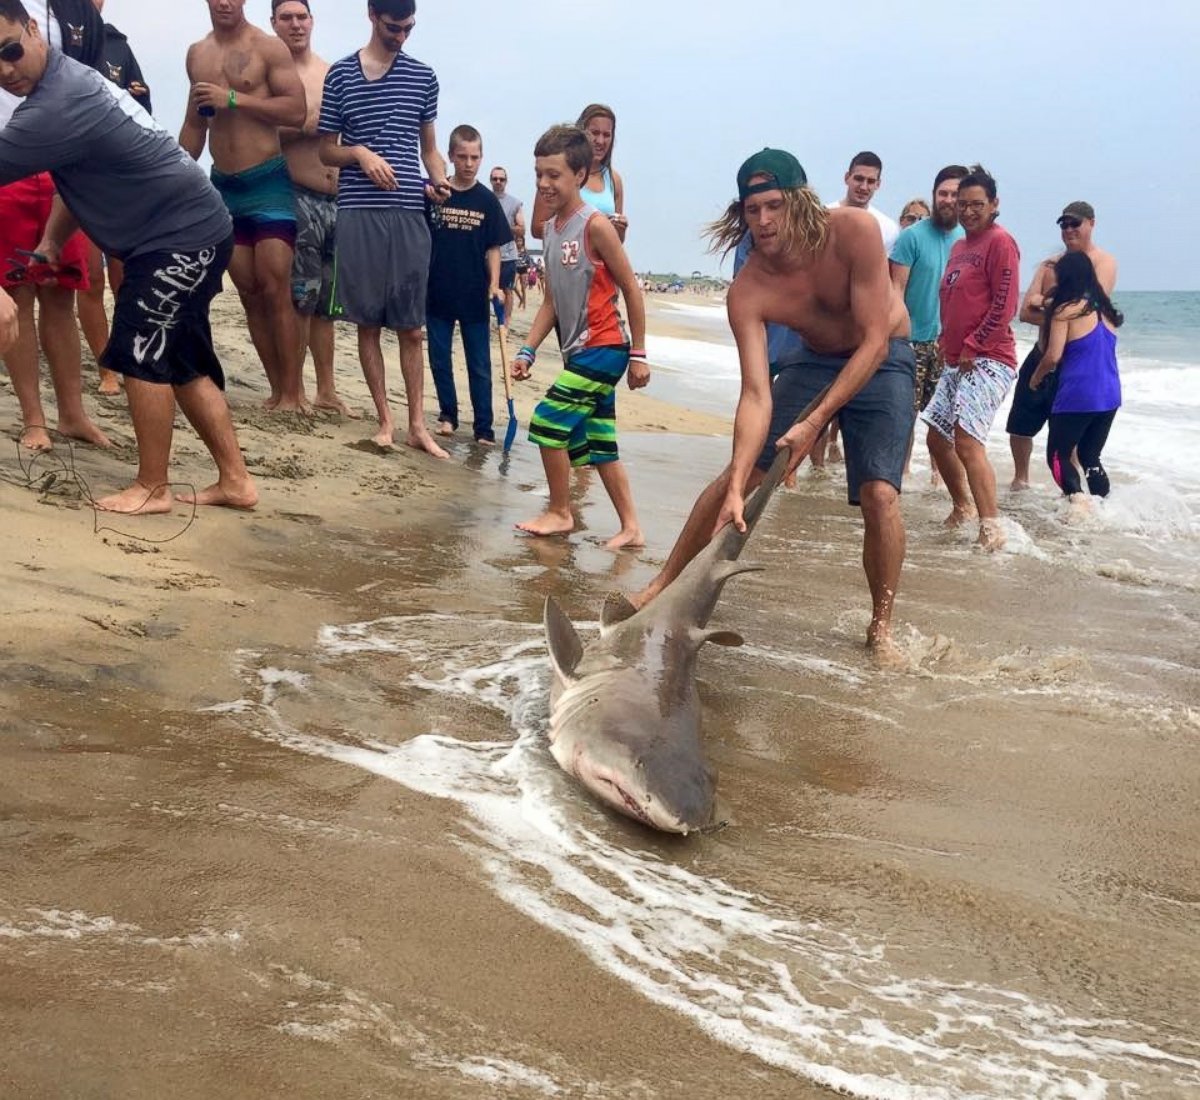 PHOTO: A man pulled a shark out of the water in Kill Devil Hills, North Carolina, on July 3, 2015.